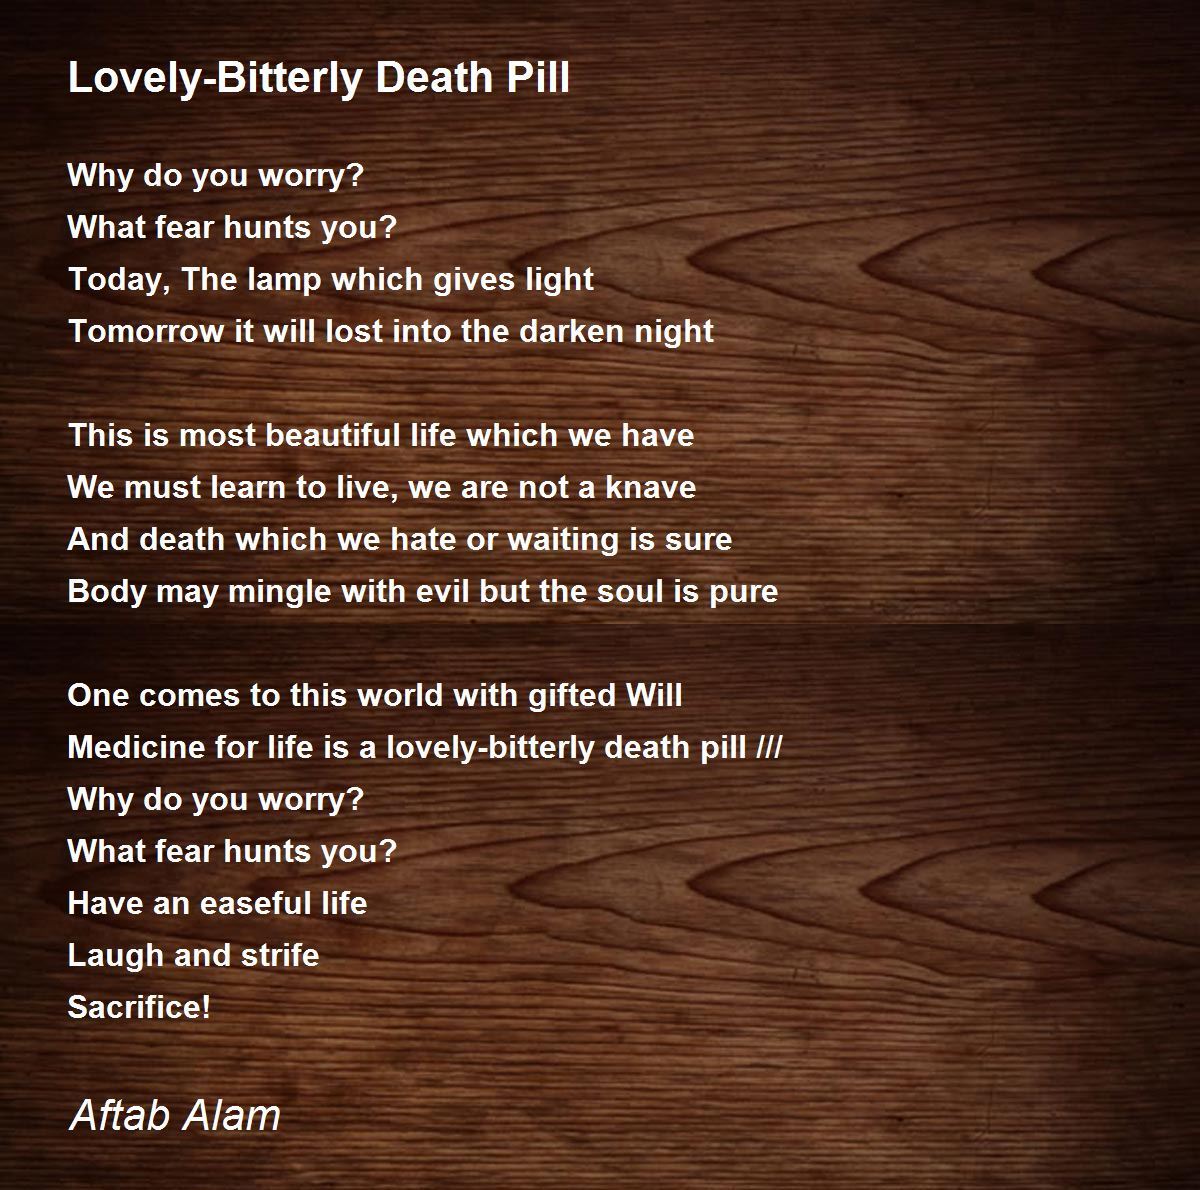 Lovely-Bitterly Death Pill - Lovely-Bitterly Death Pill Poem by ...